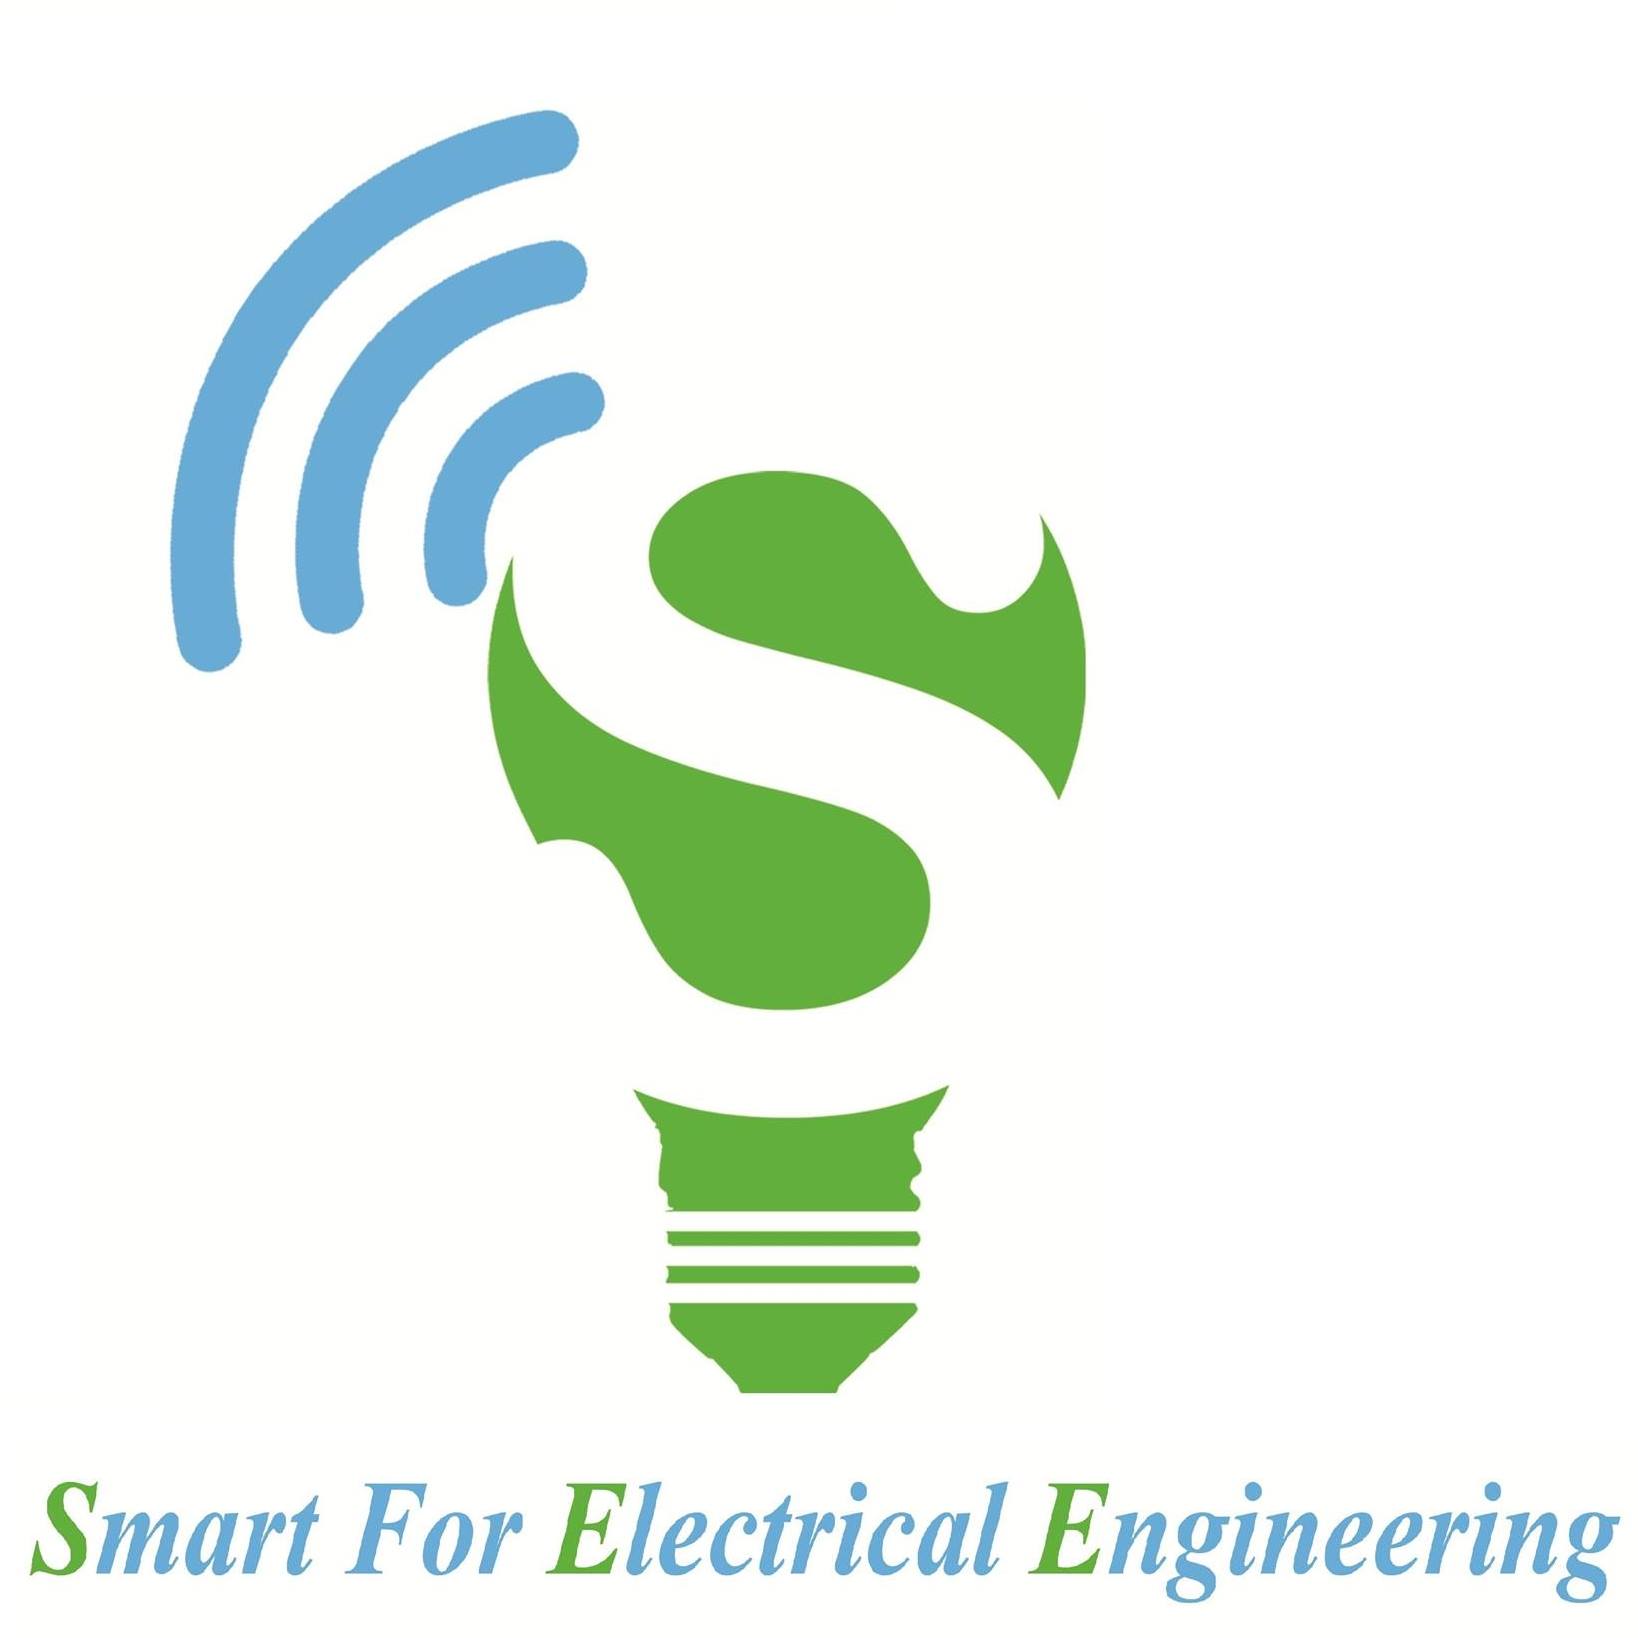 Smart for Electrical Engineering - See